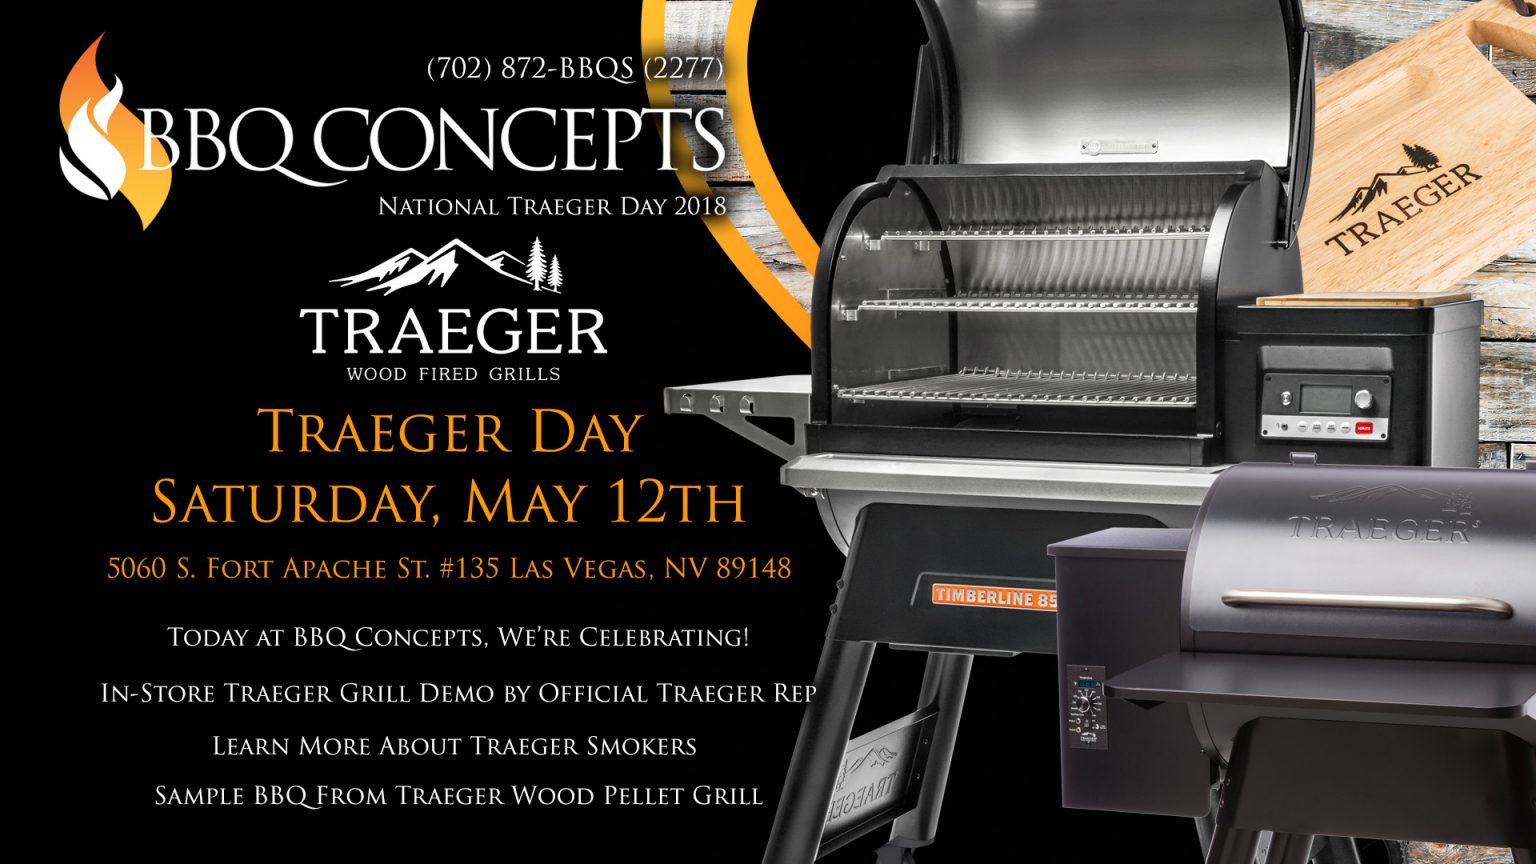 National Traeger Day at BBQ Concepts of Las Vegas, Nevada BBQ Concepts